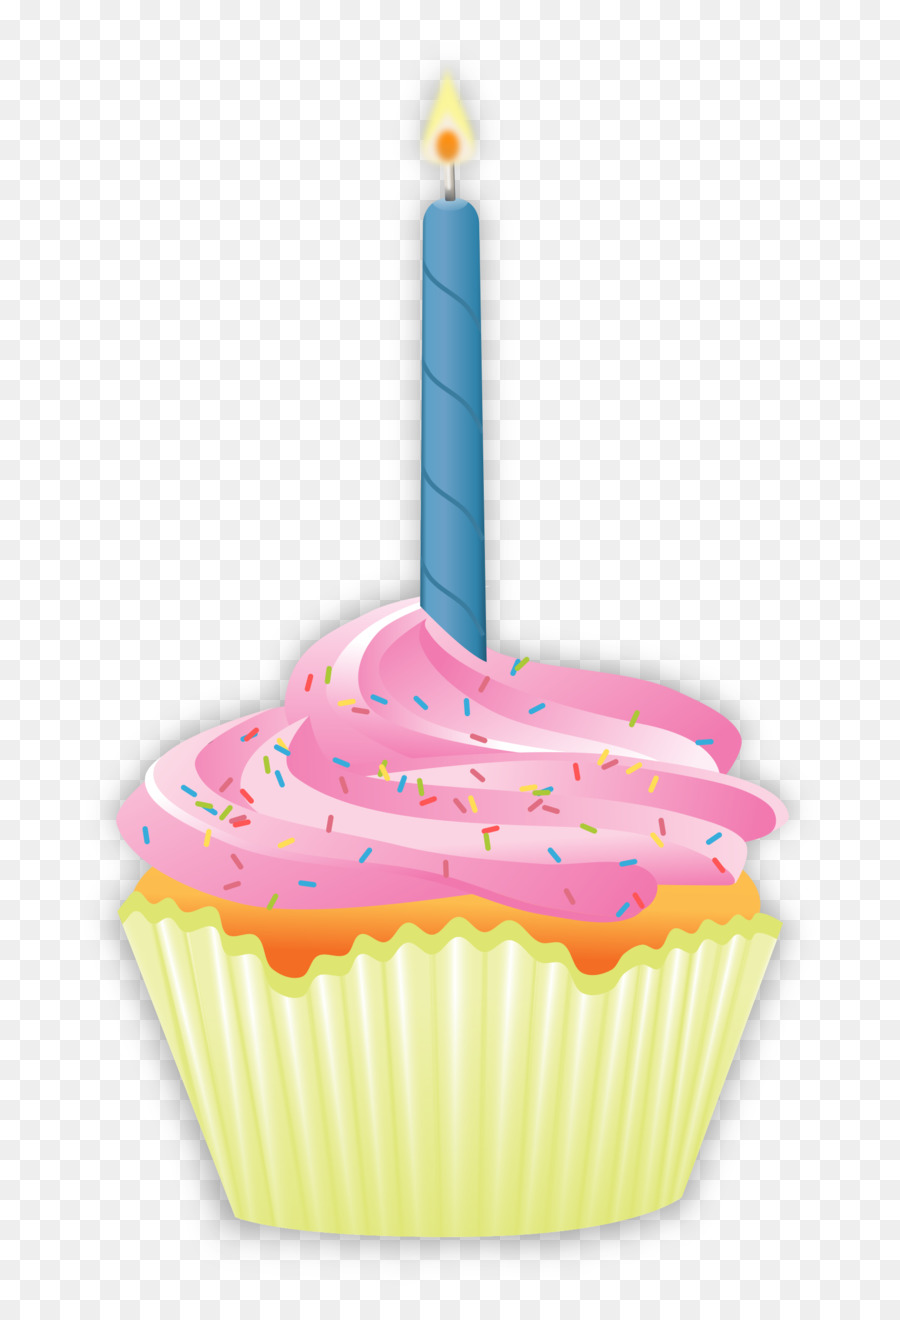 Cake cartoon product . Candles clipart birthday cupcake